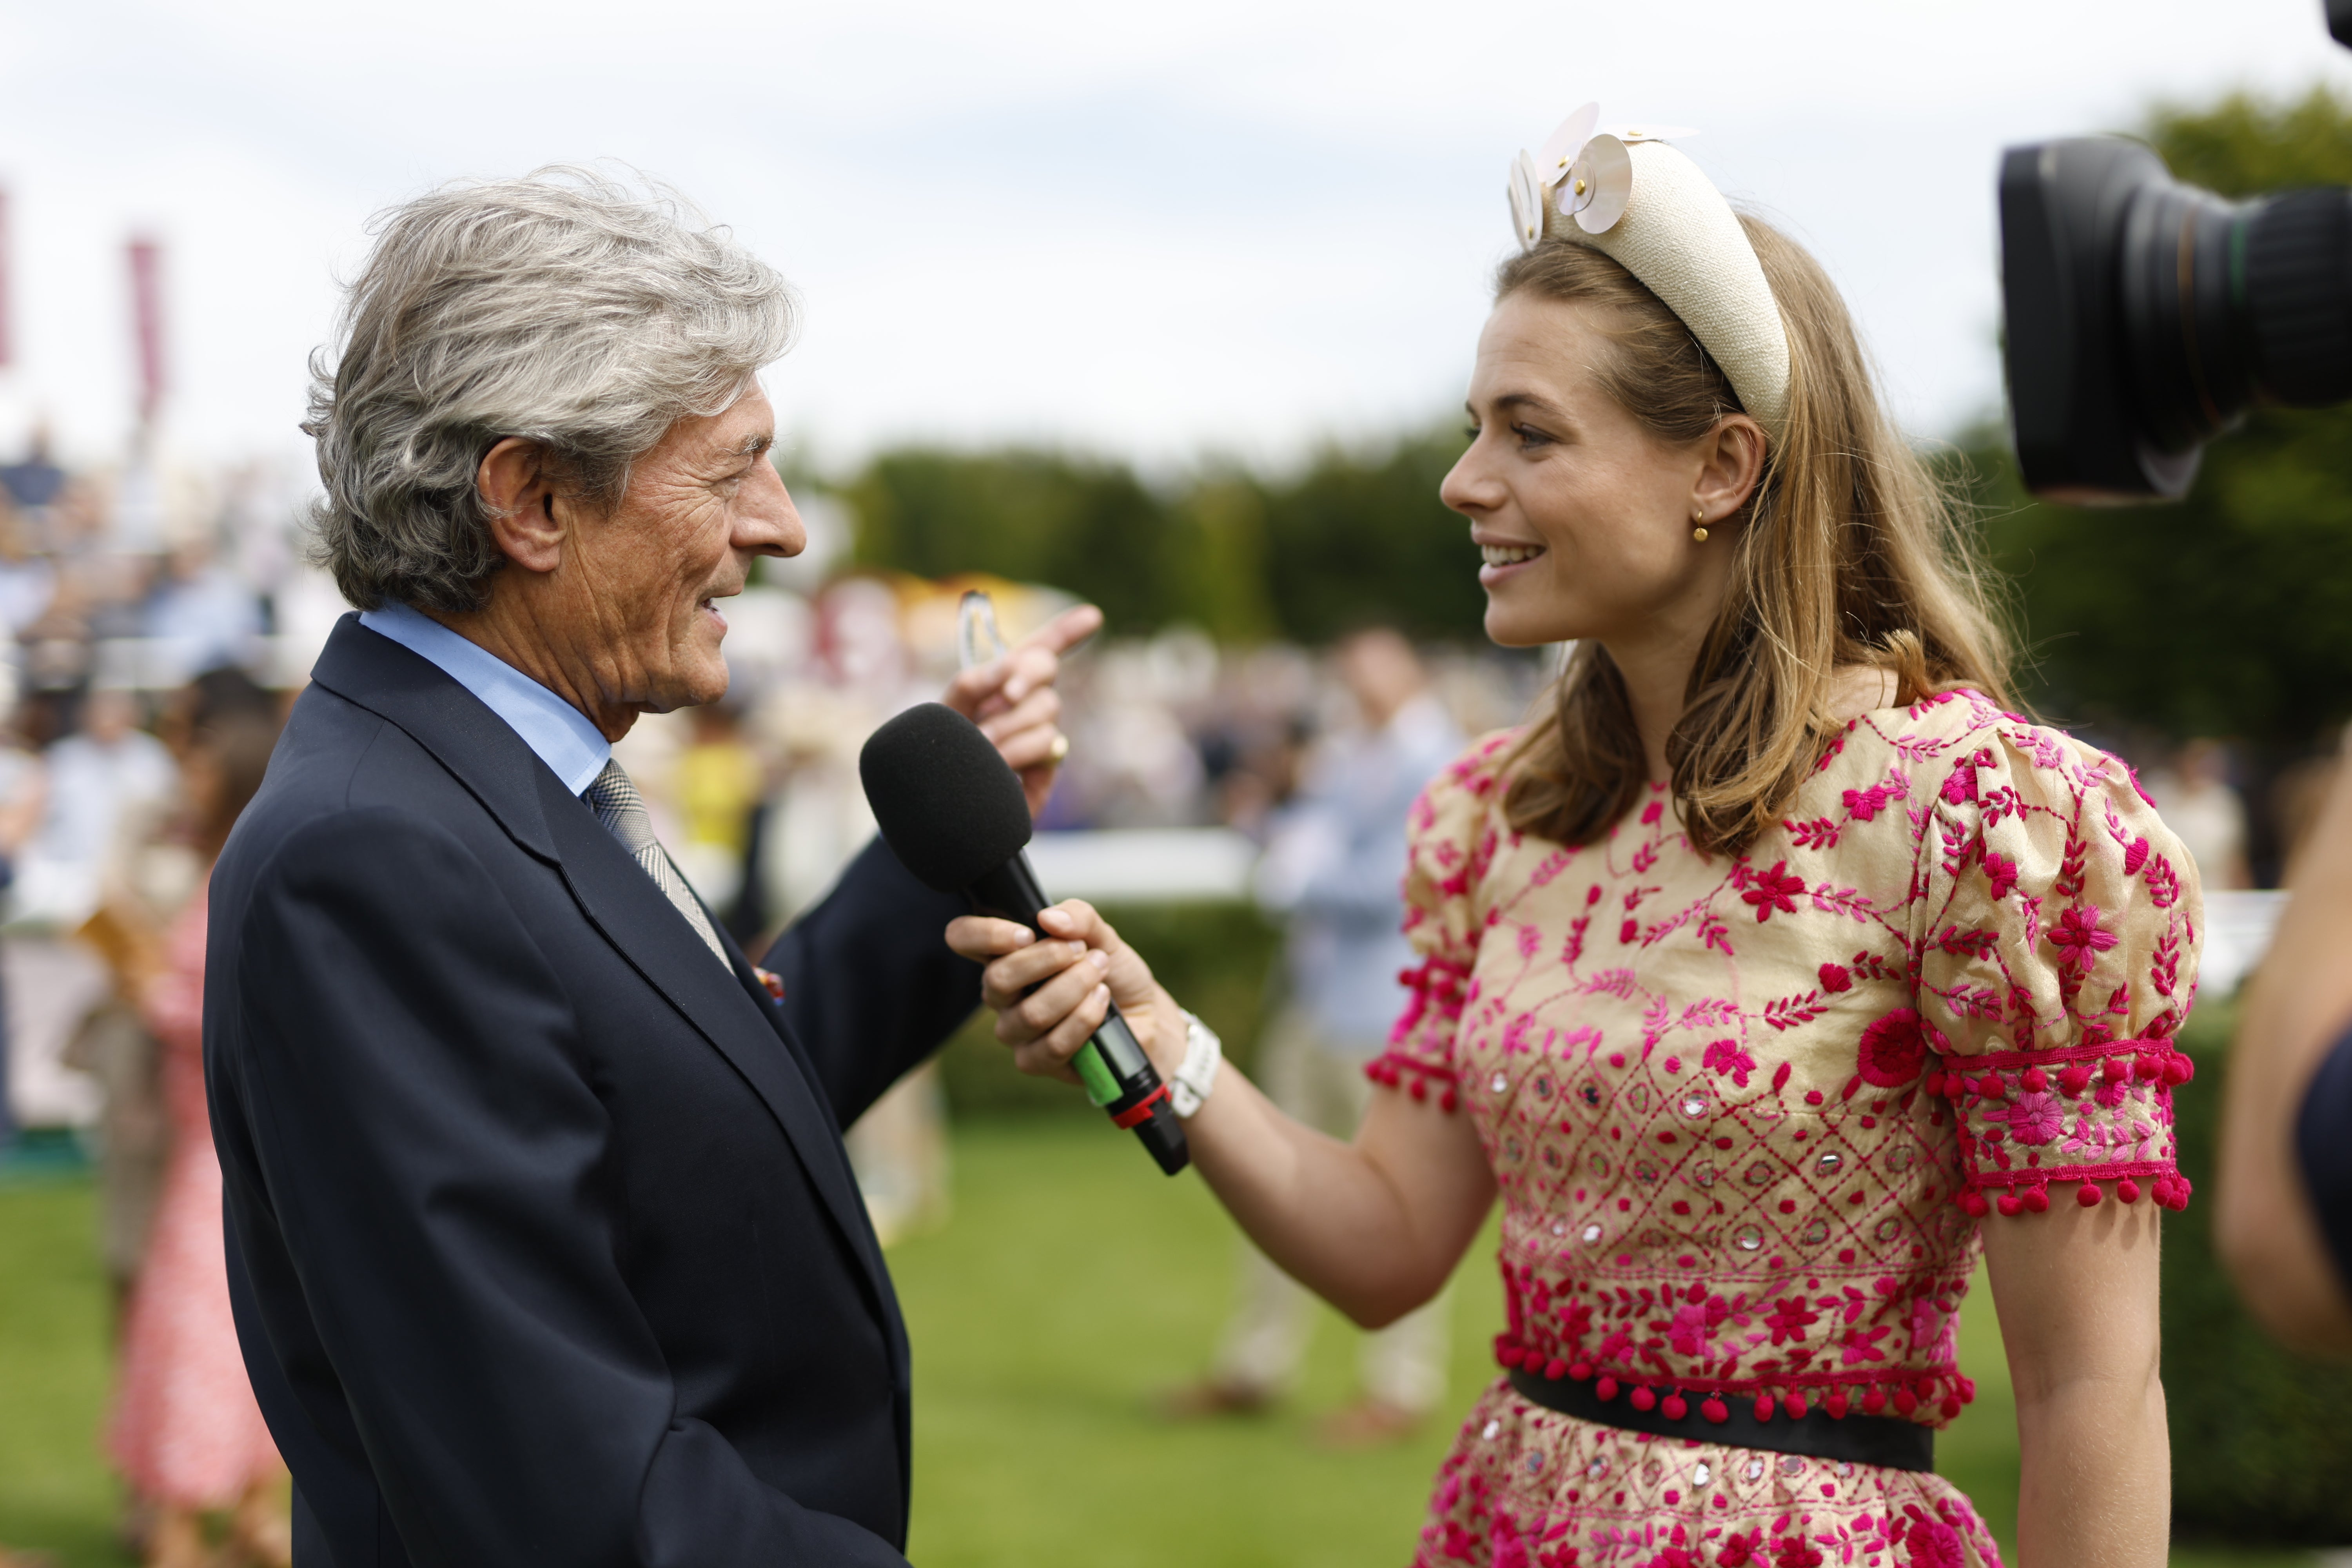 Nigel Havers is interviewed by Rosie Tapner at the Qatar Goodwood Festival 2022 (Steven Paston/PA)